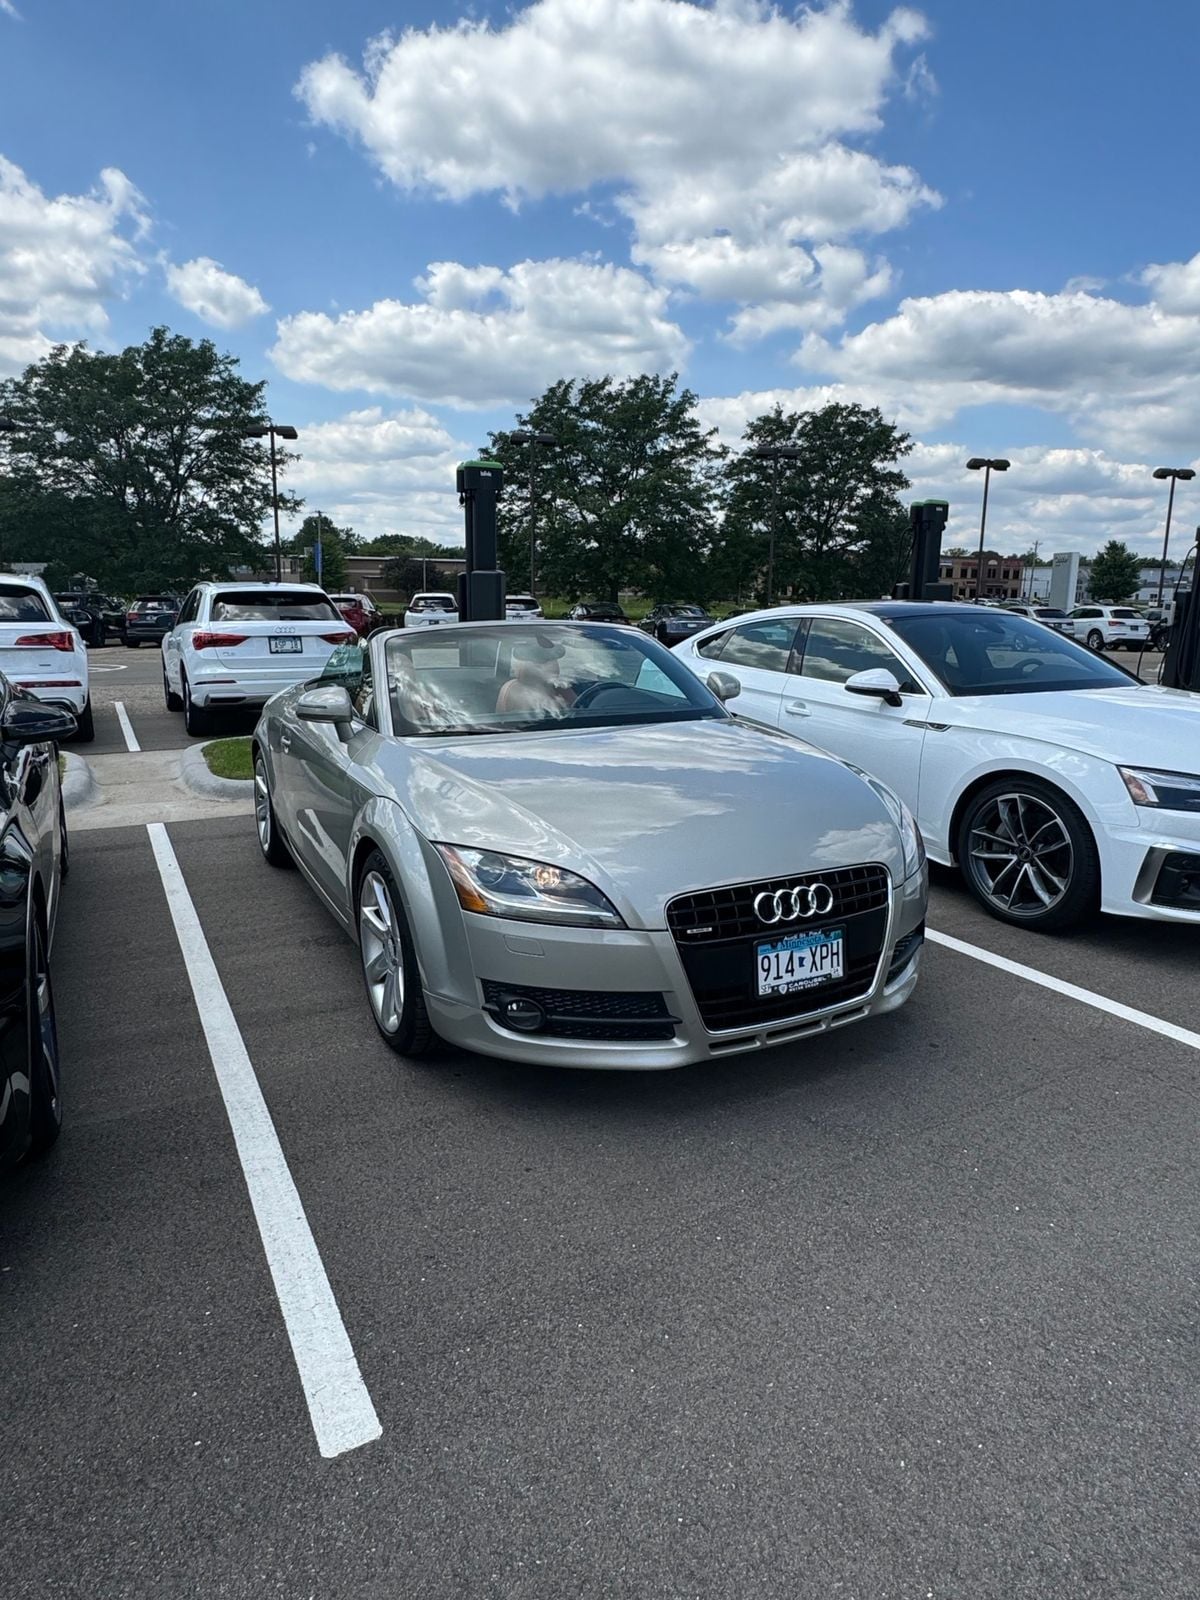 Used 2008 Audi TT Base with VIN TRURD38JX81002165 for sale in Maplewood, Minnesota